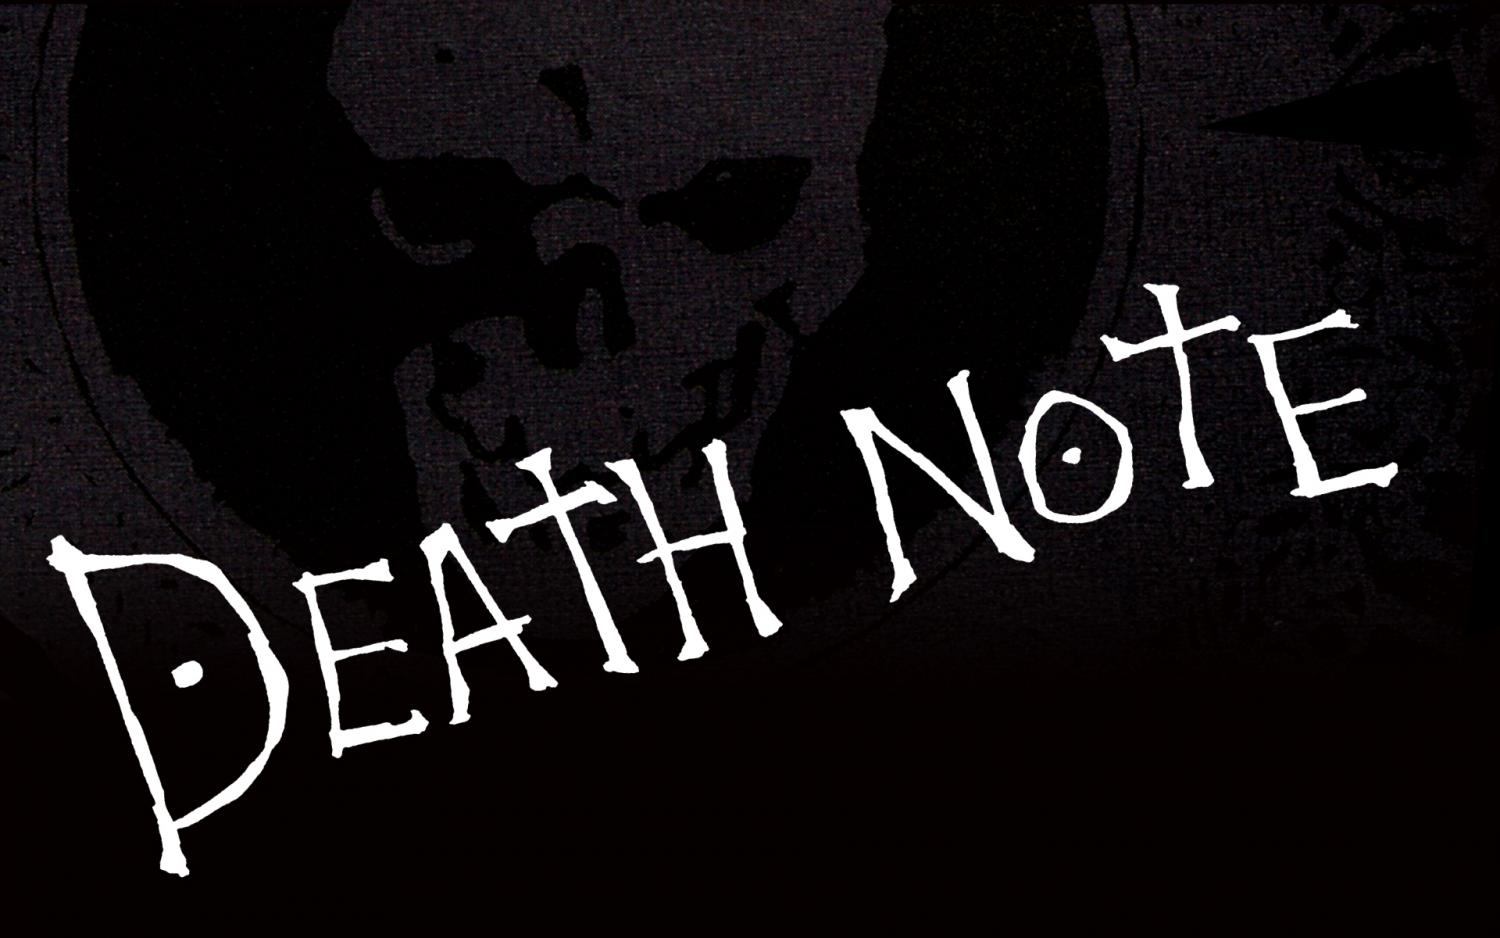 “Death Note” American remake disappoints – 3TEN